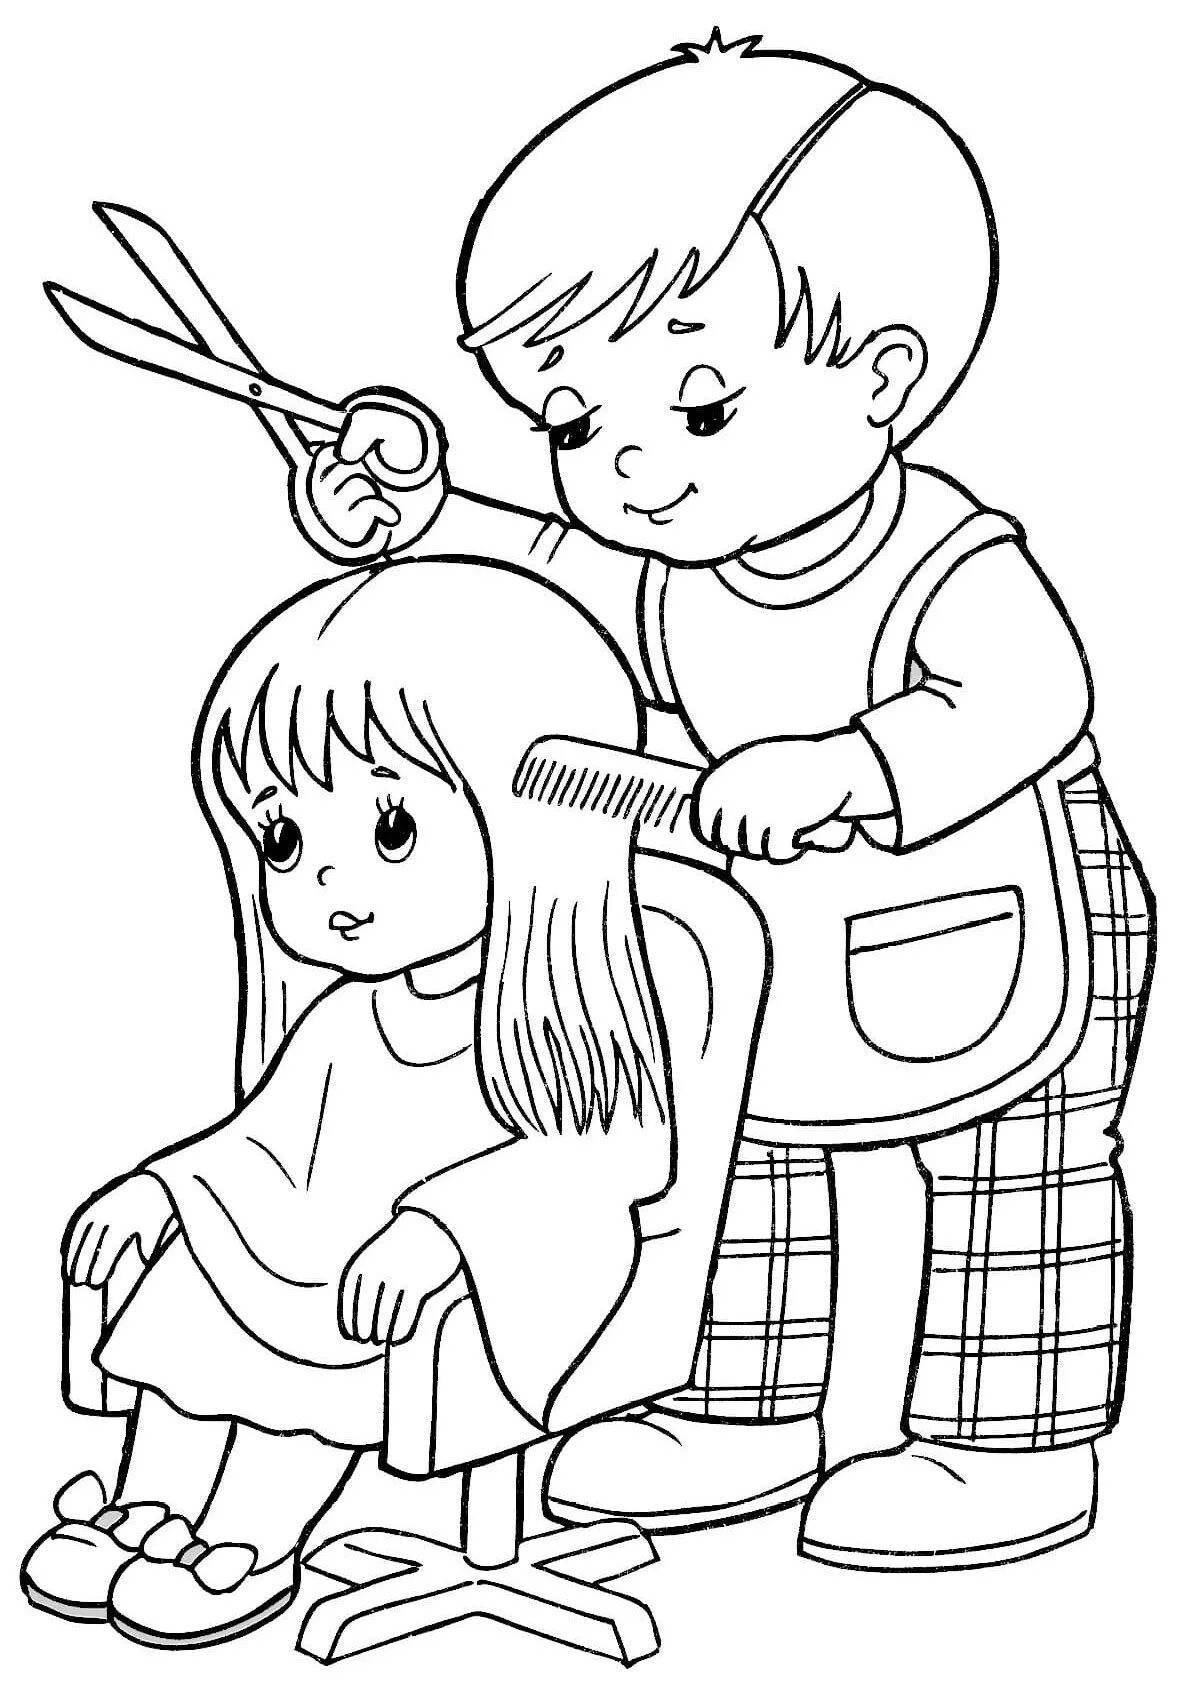 Colorful job coloring pages for kids